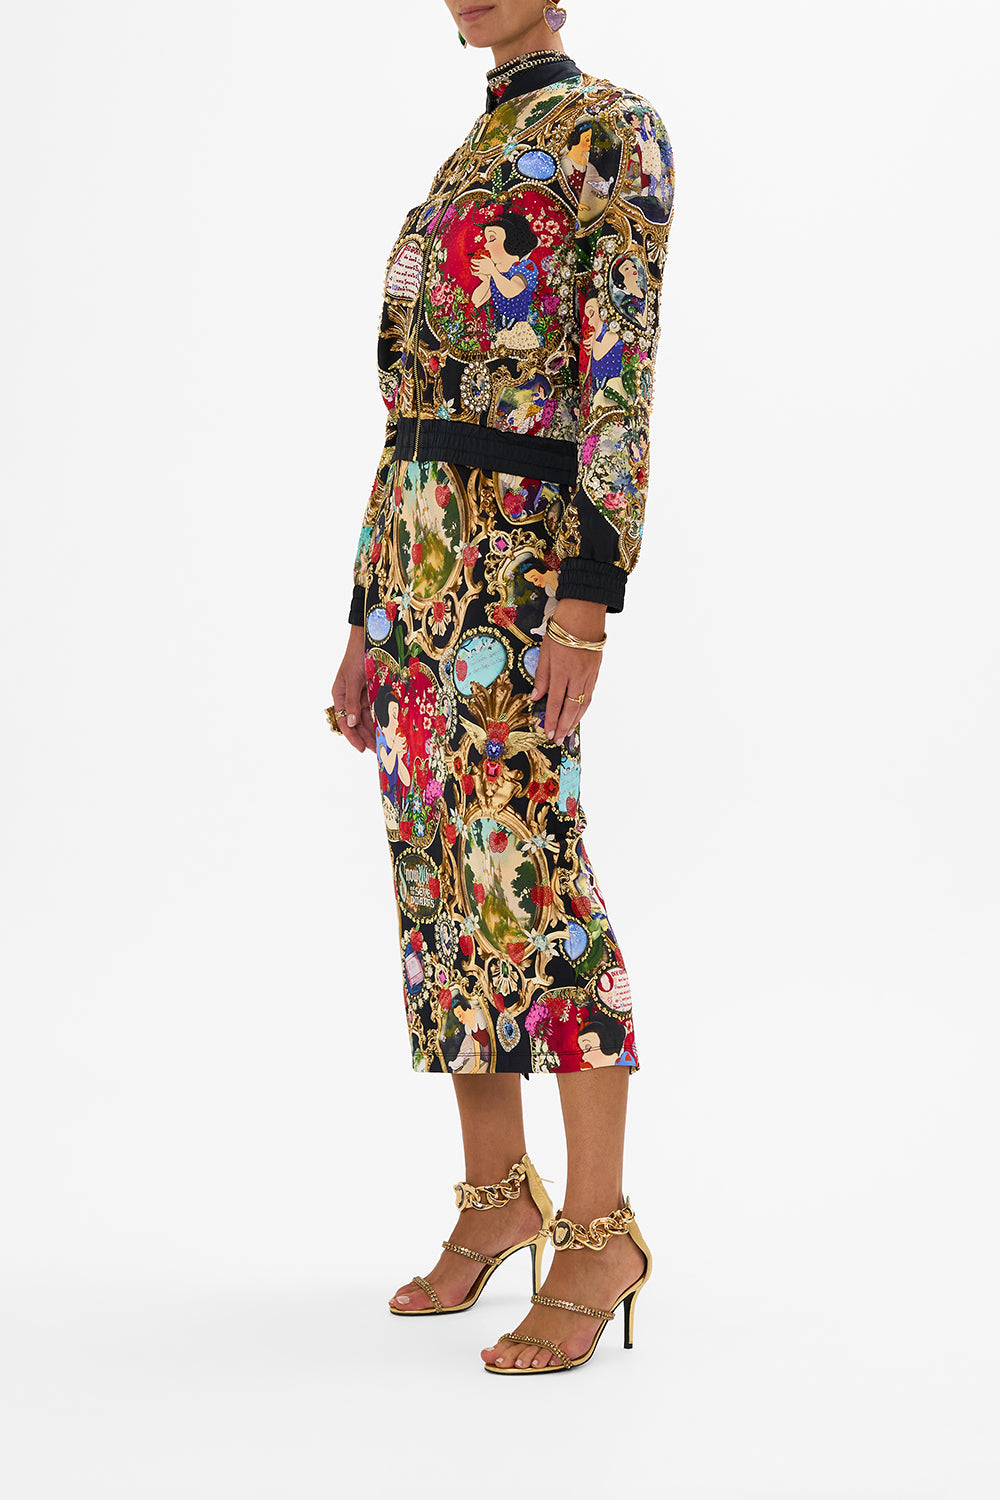 Disney CAMILLA silk bomber jacket in Happily Ever After print